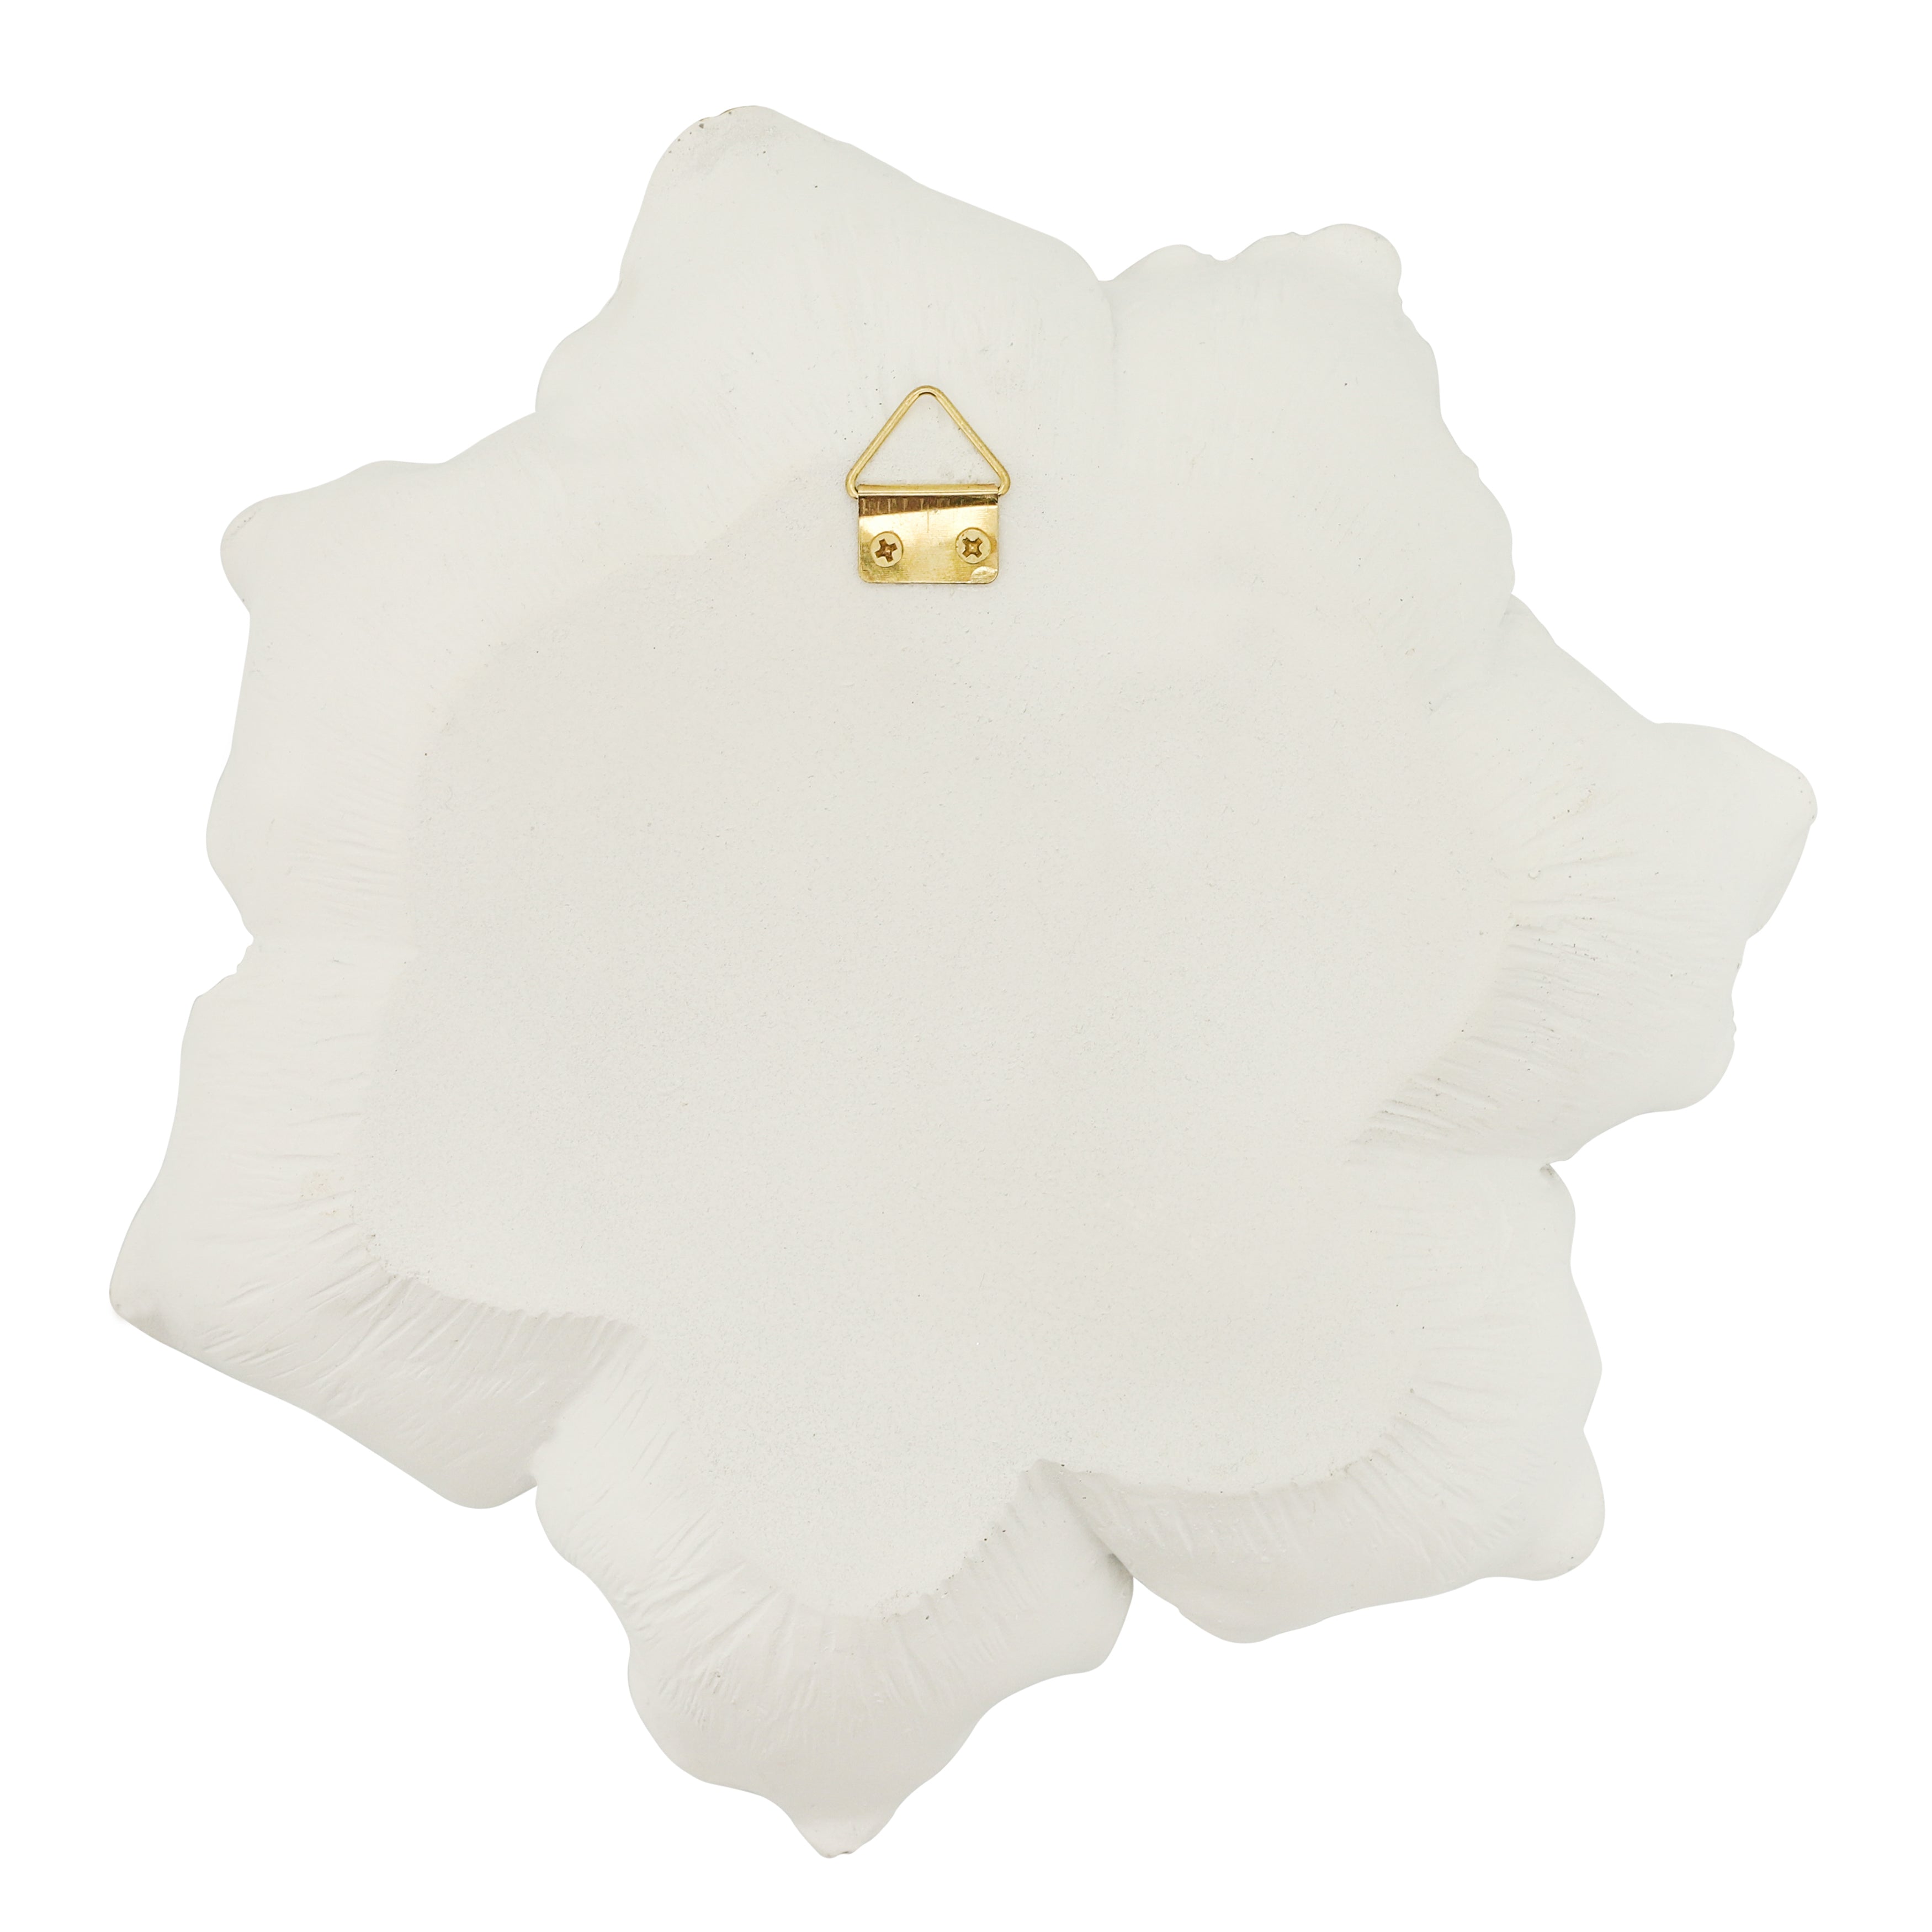 Resin 9" Flower Wall Accent, White